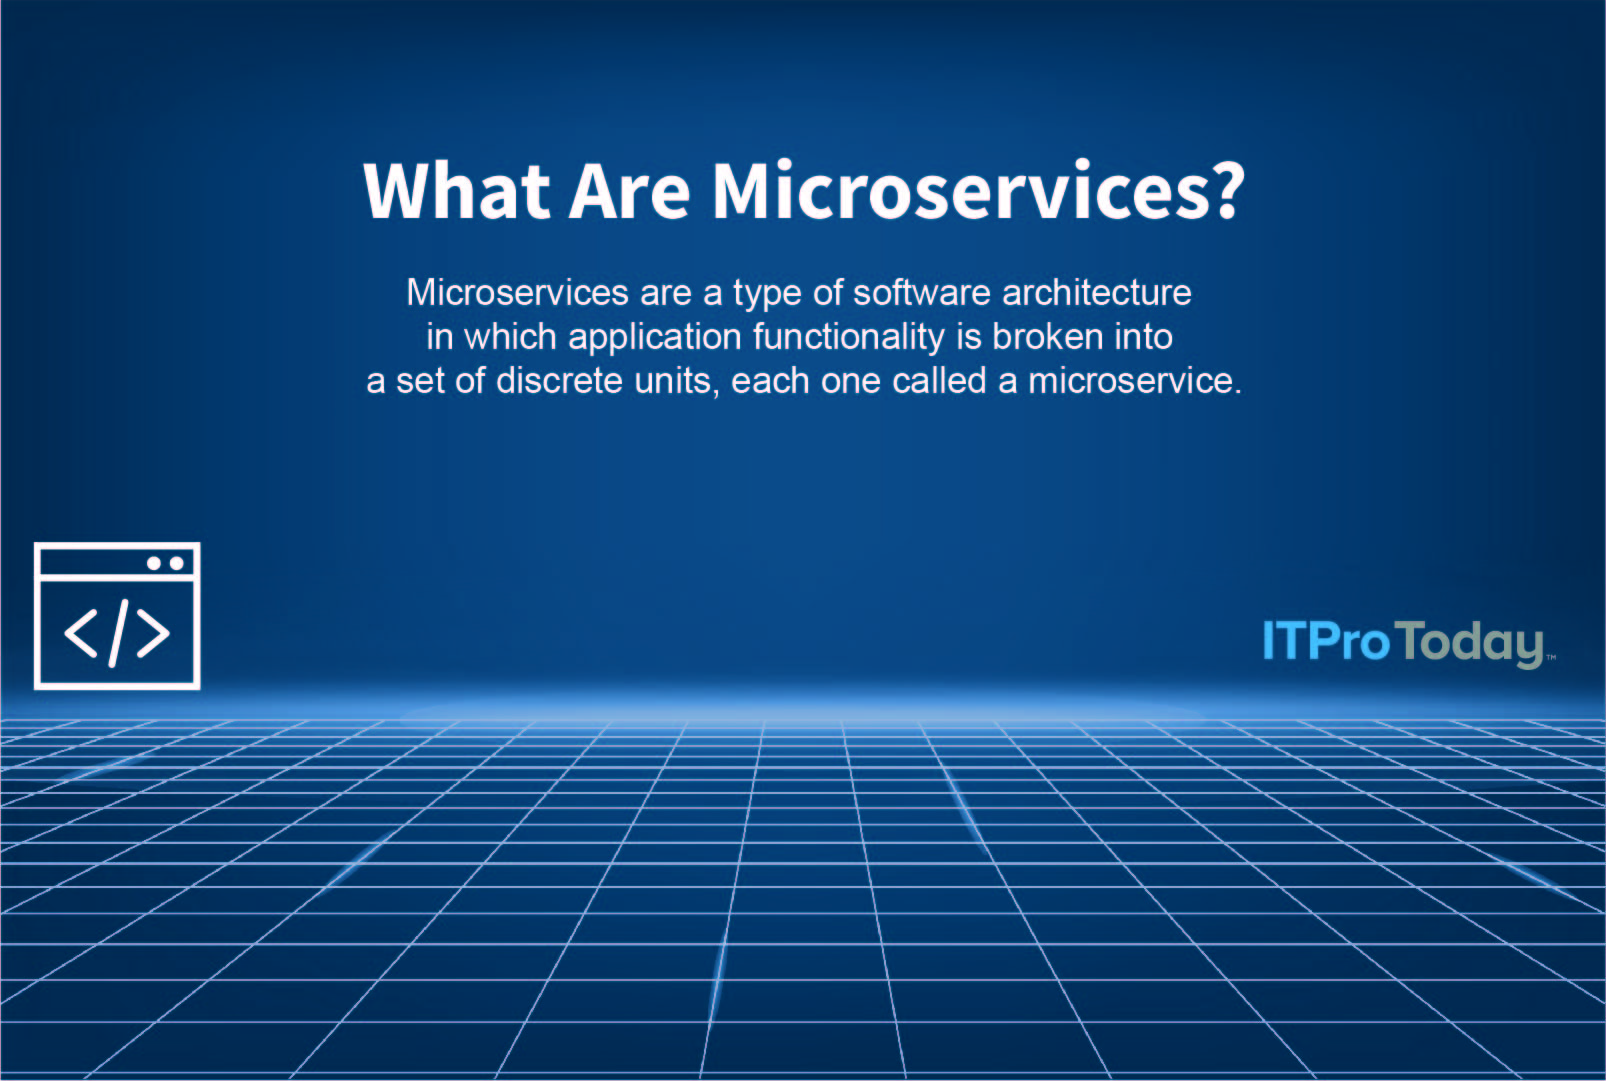 Microservices definition provided by ITPro Today